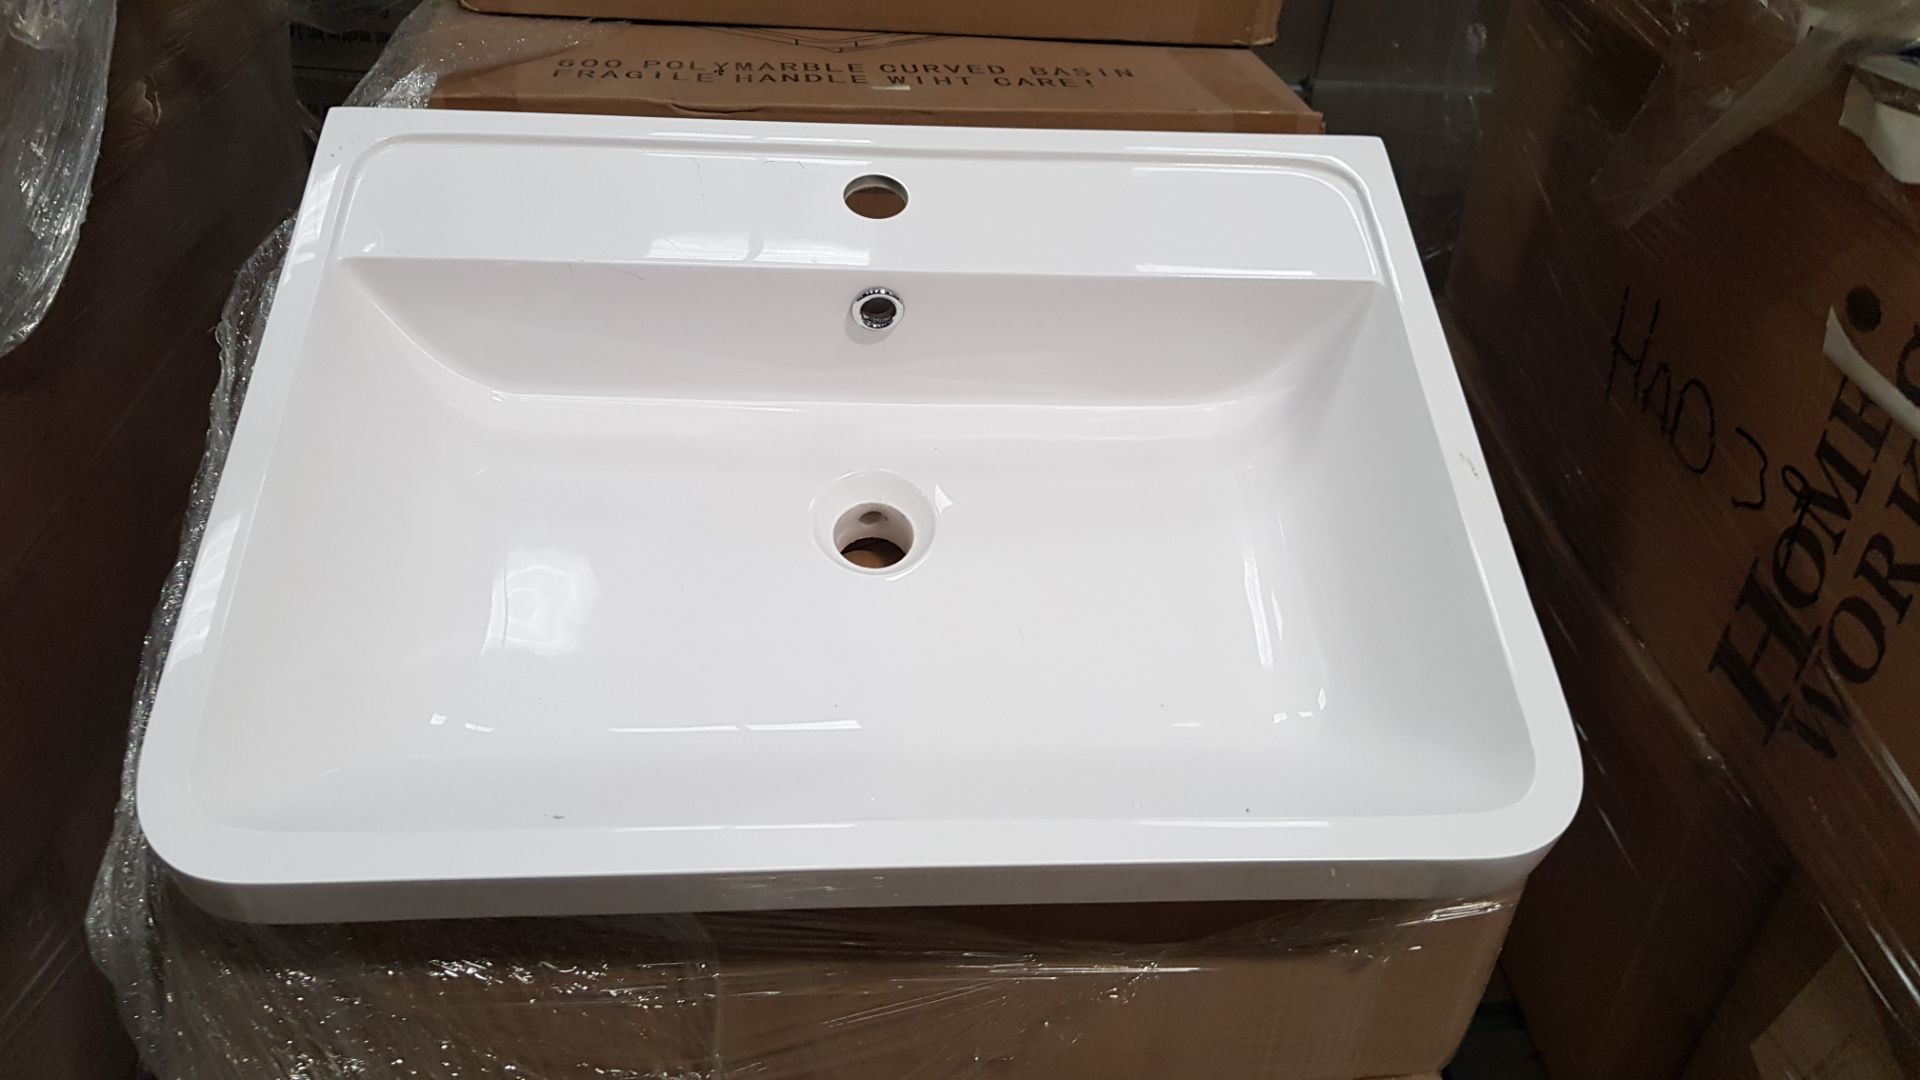 4 X BRAND NEW BOXED 600 POLYMARBLE CURVED BASIN SINK - IN 4 BOXES